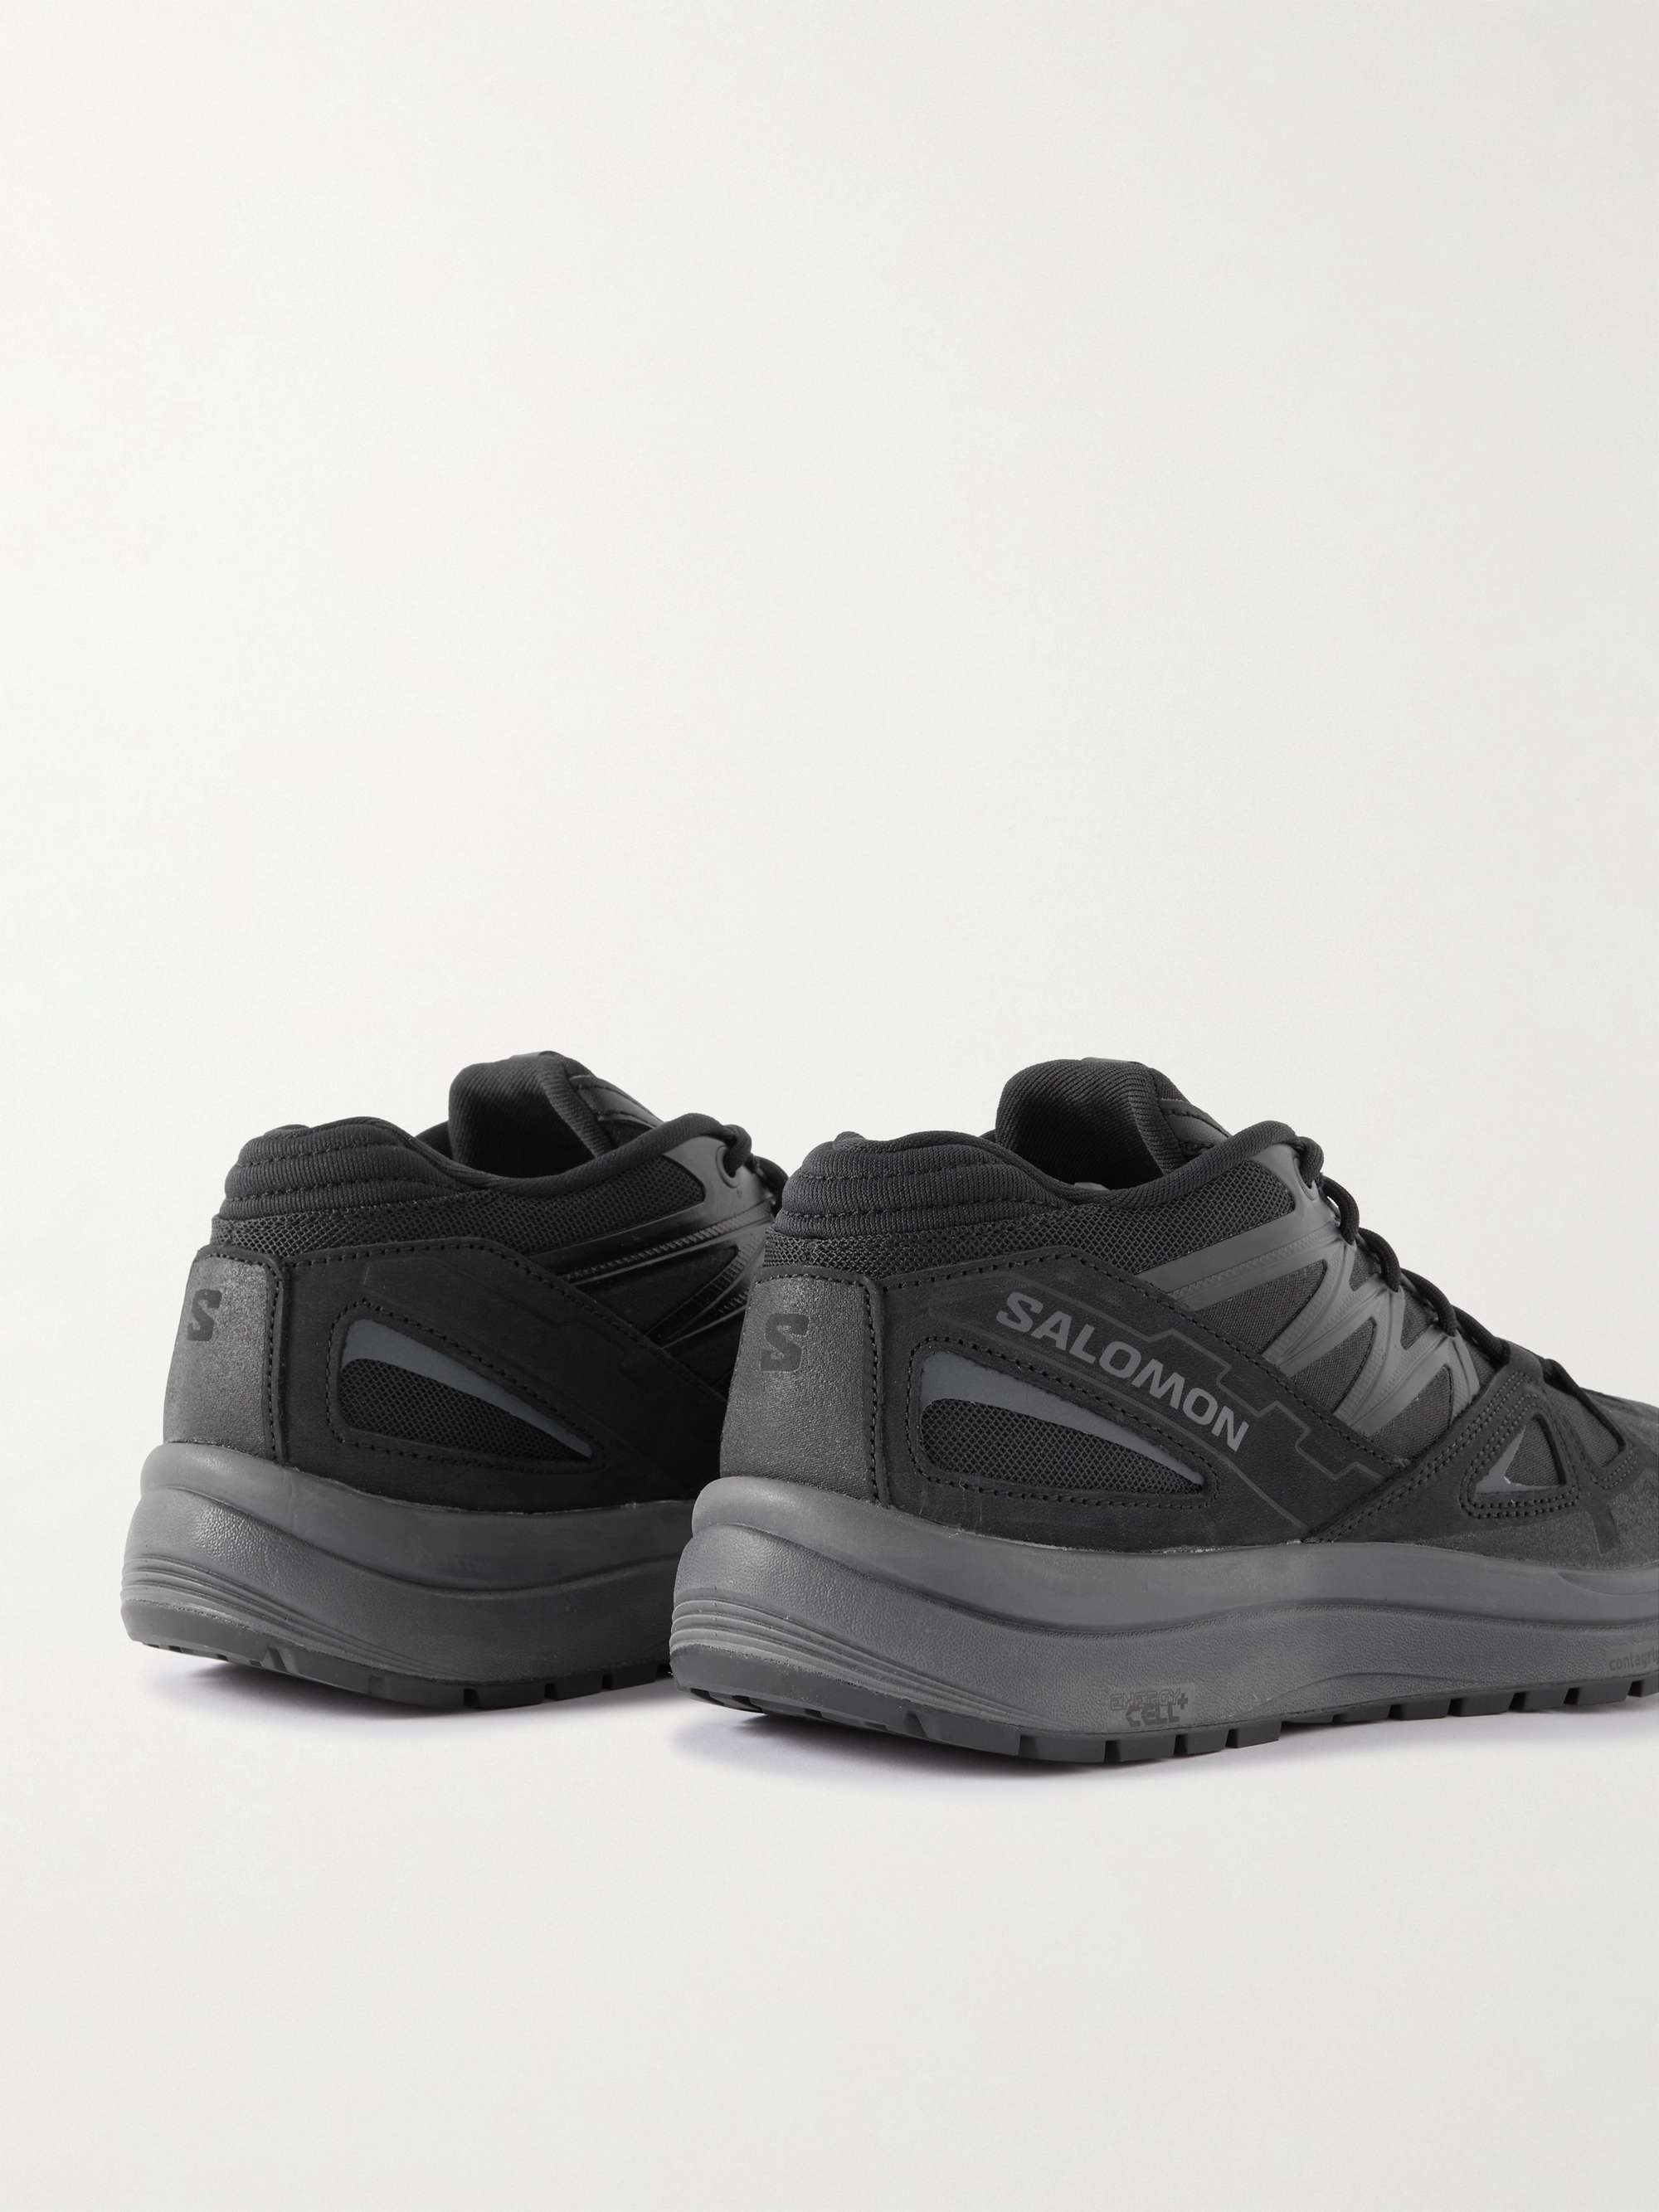 SALOMON Odyssey Advanced Suede and Mesh Hiking Shoes